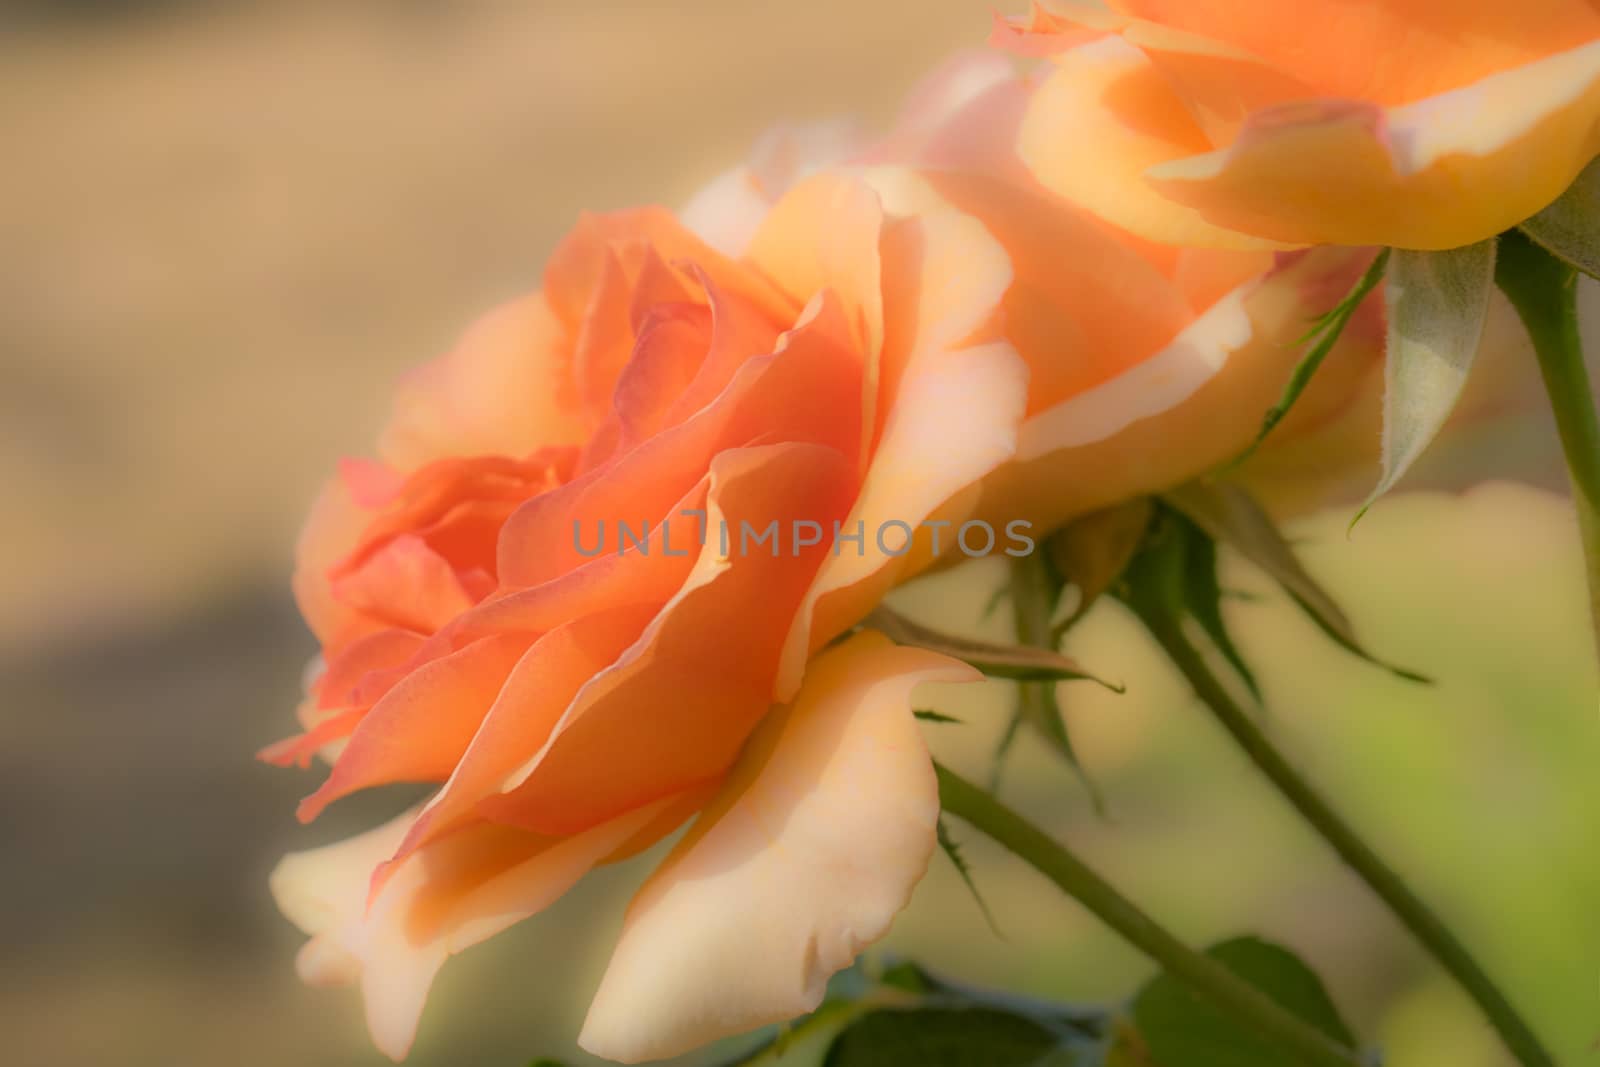 Bunch of beautiful spring apricot rose flowers growing in garden